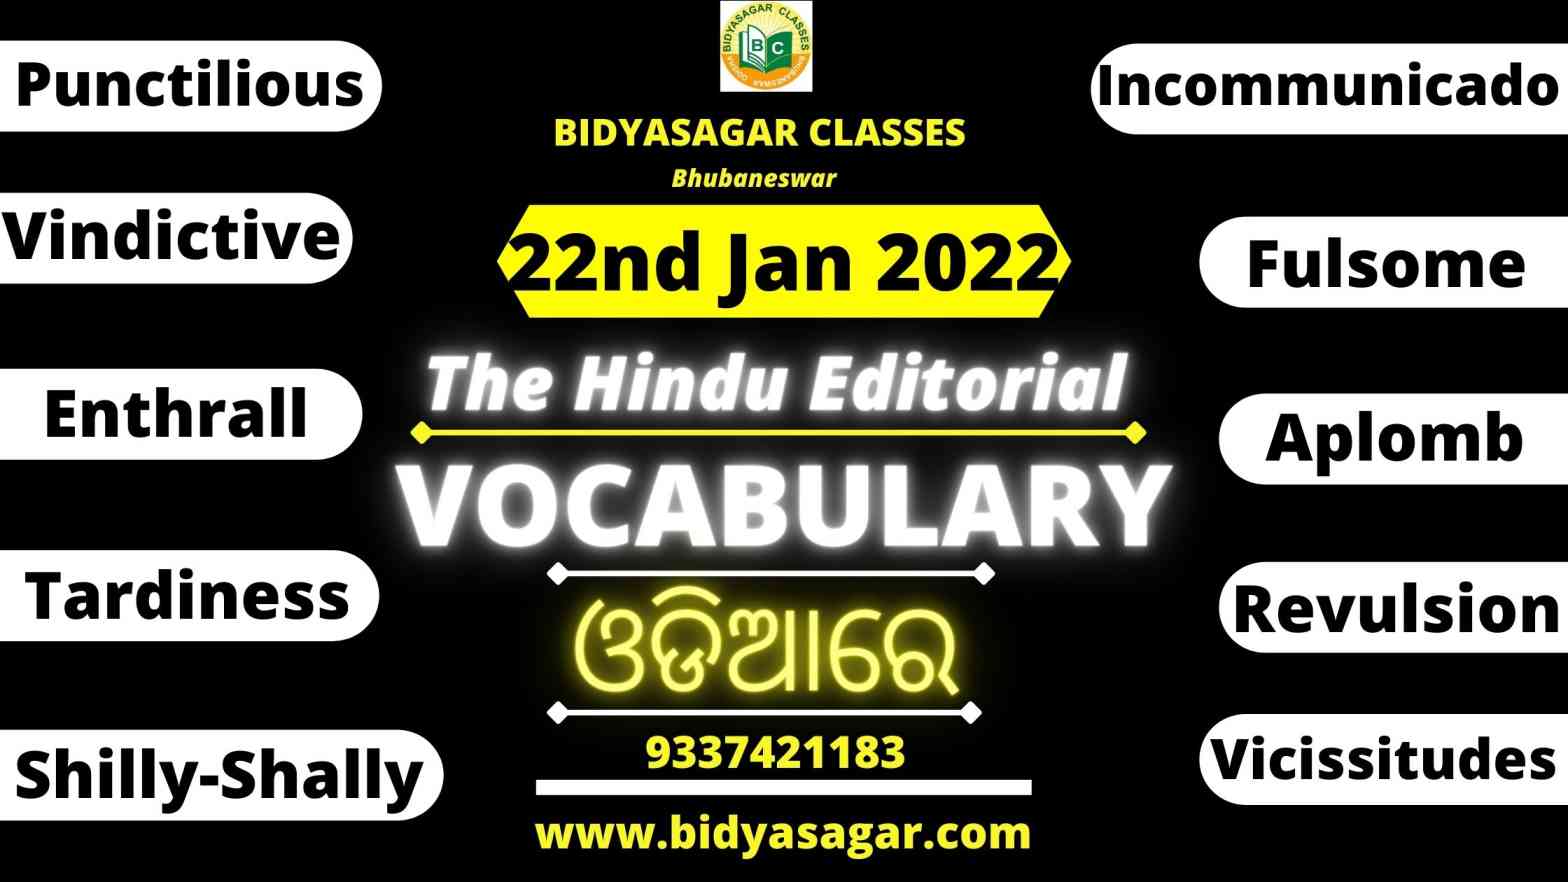 The Hindu Editorial Vocabulary of 22nd January 2022